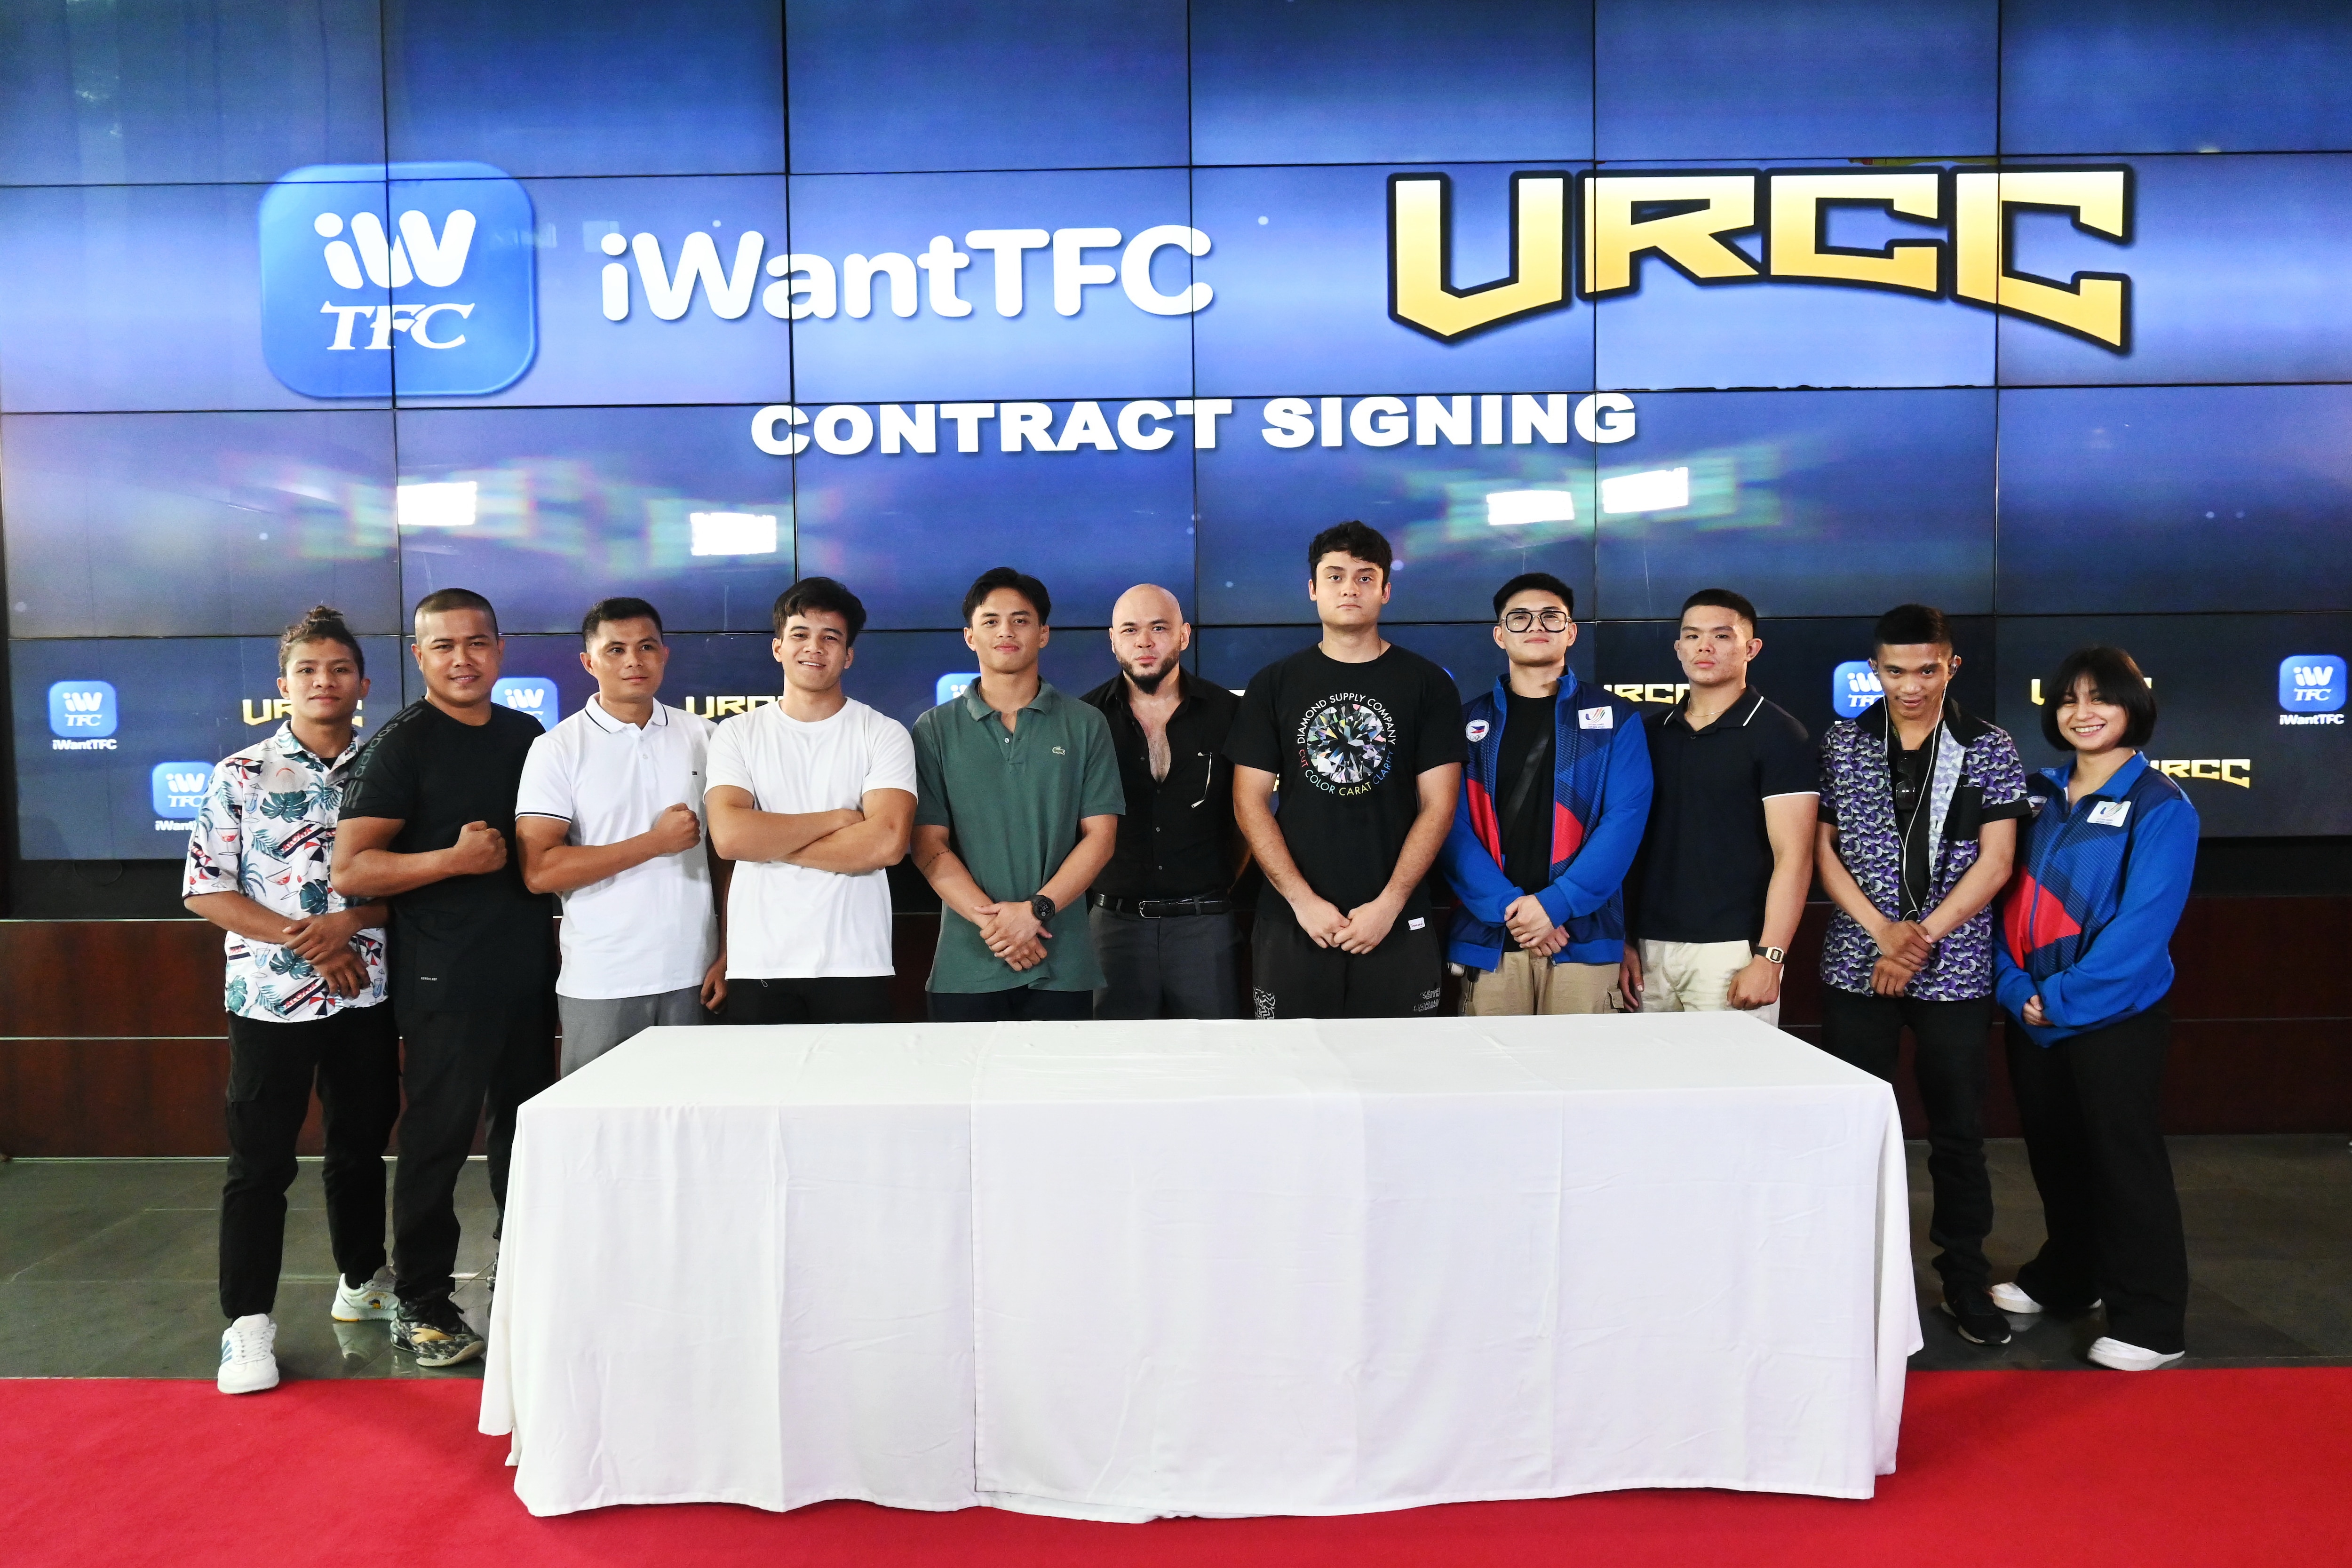 URCC fighters were also in attendance at the contract signing